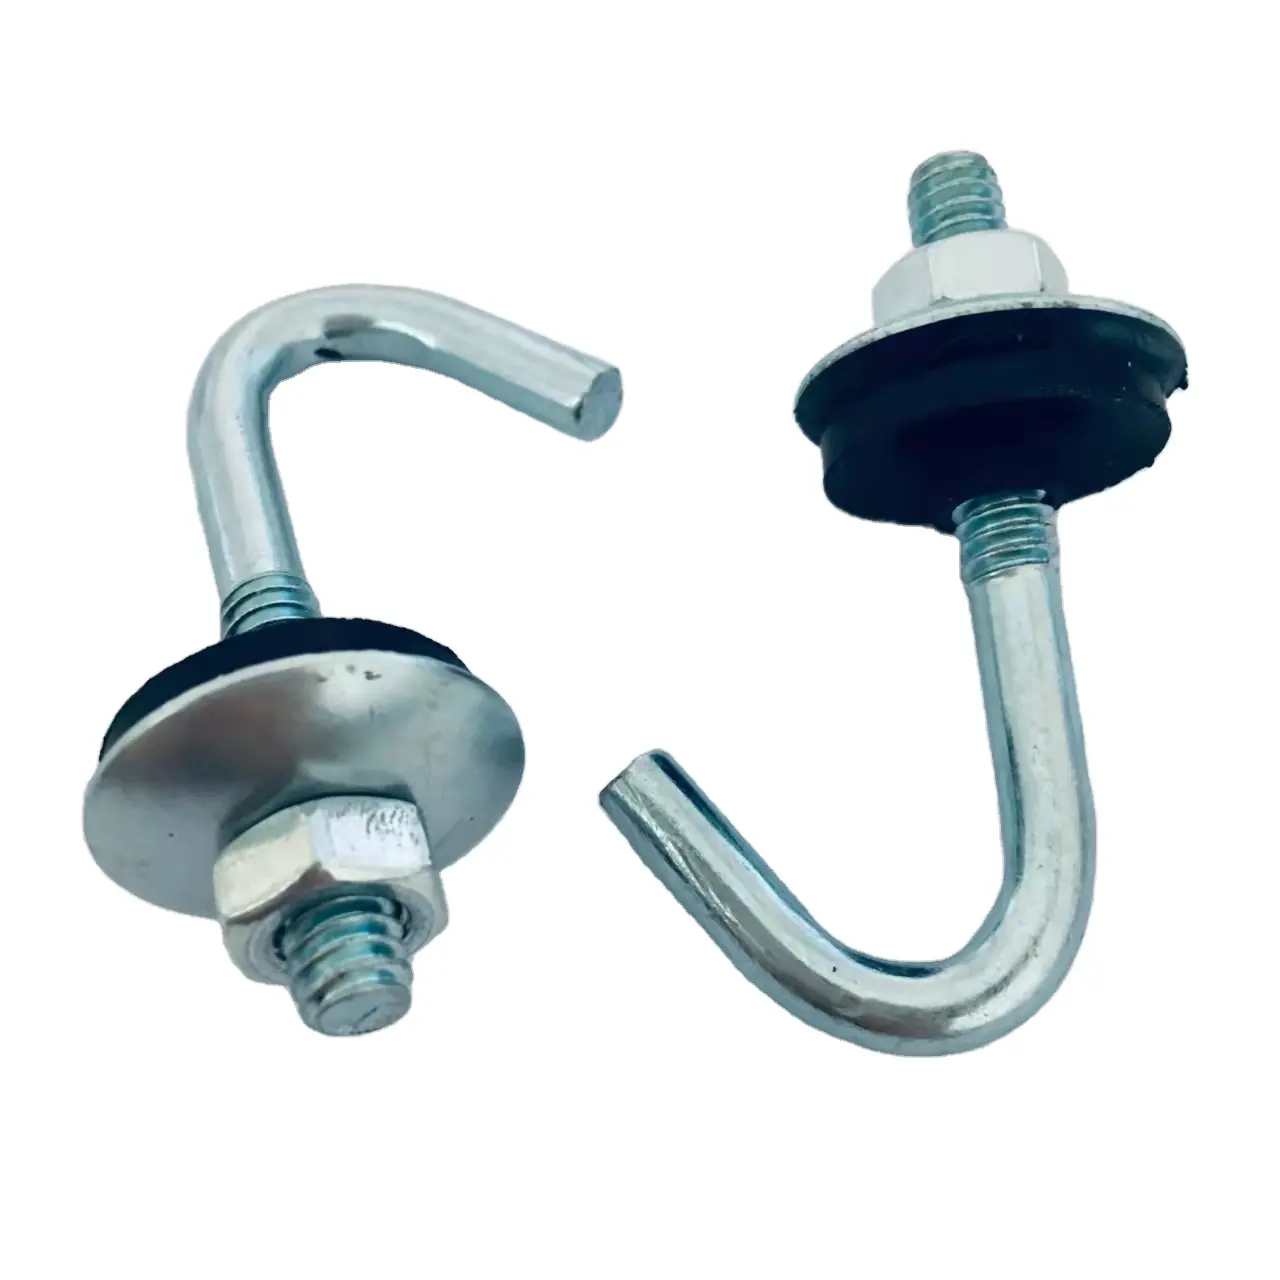 YZ-B003 low price J hook Roofing Bolt with accessories For Southern Amerian Countries